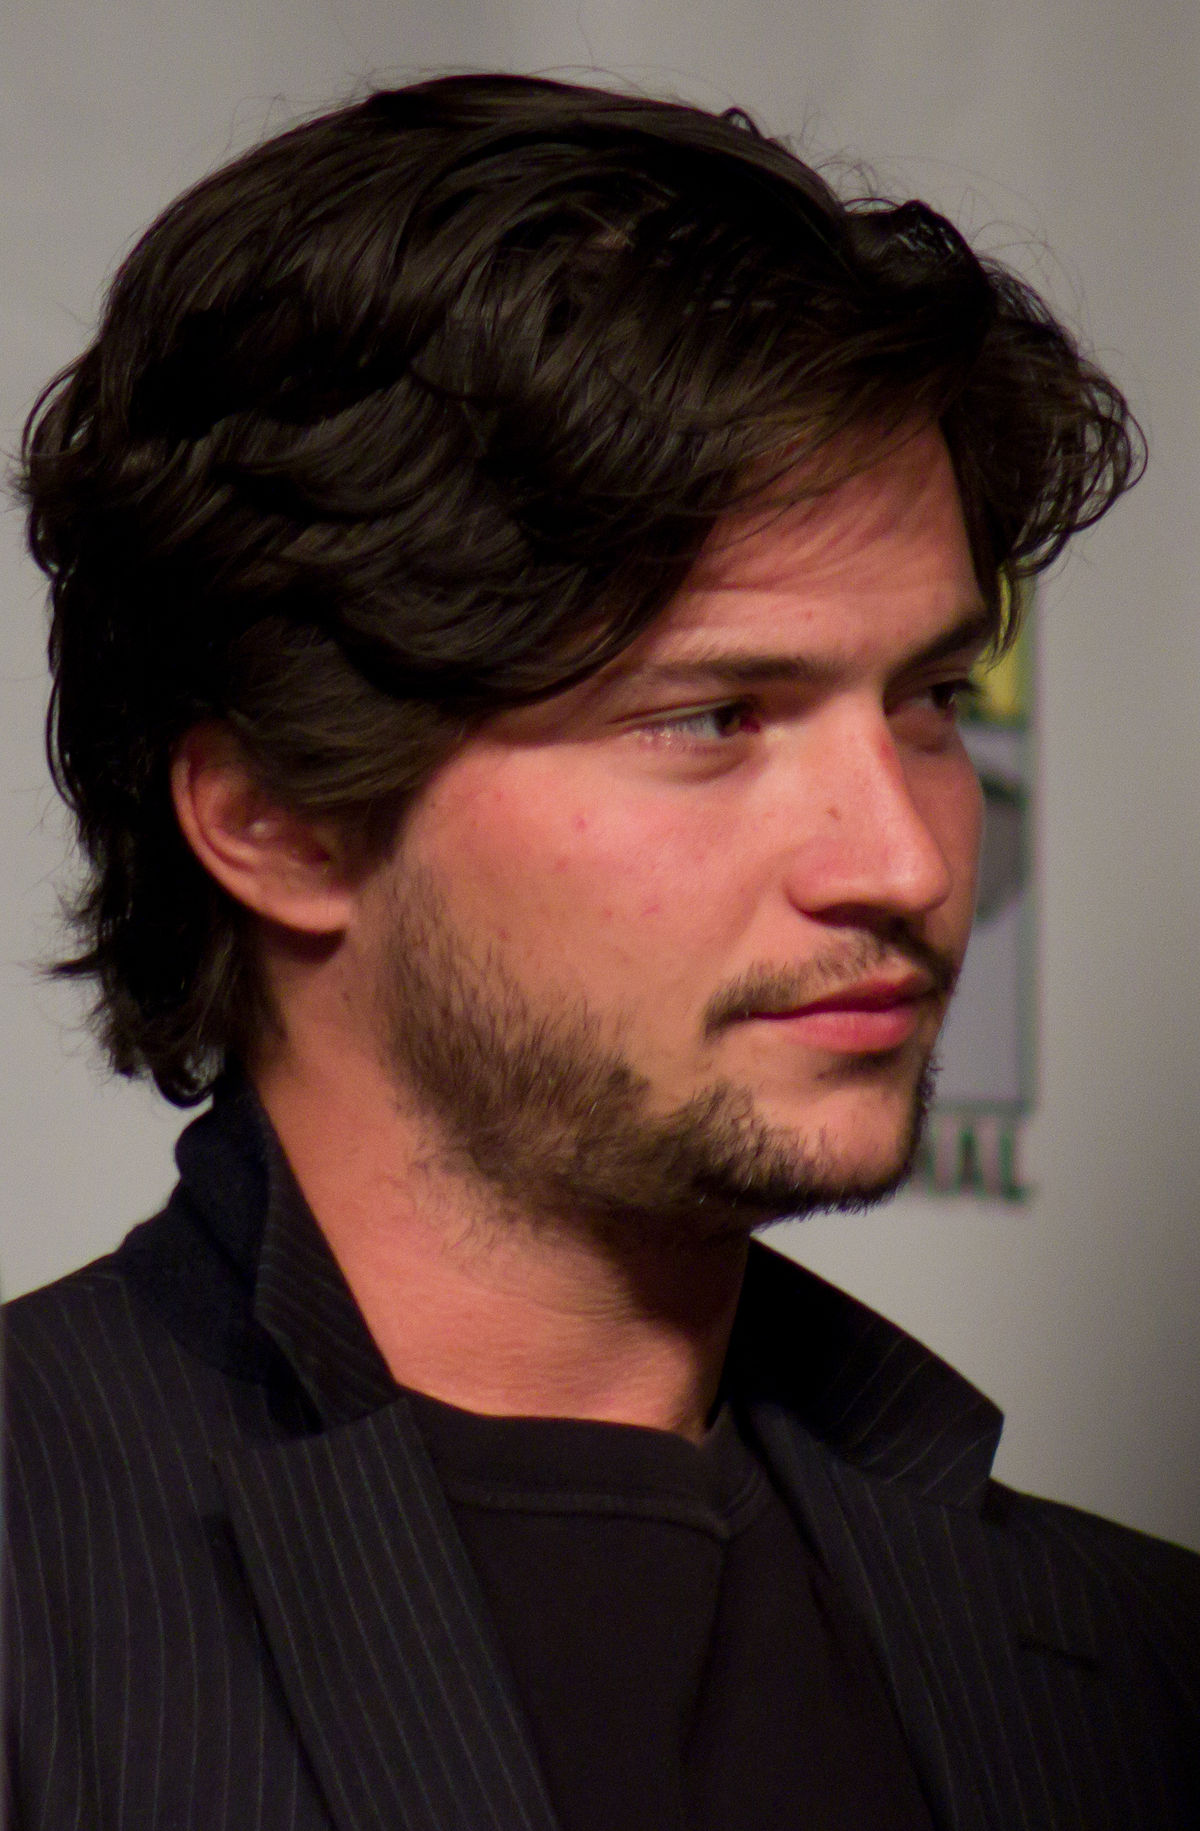 File:Thomas McDonell 2013 (cropped).jpg - Wikimedia Commons